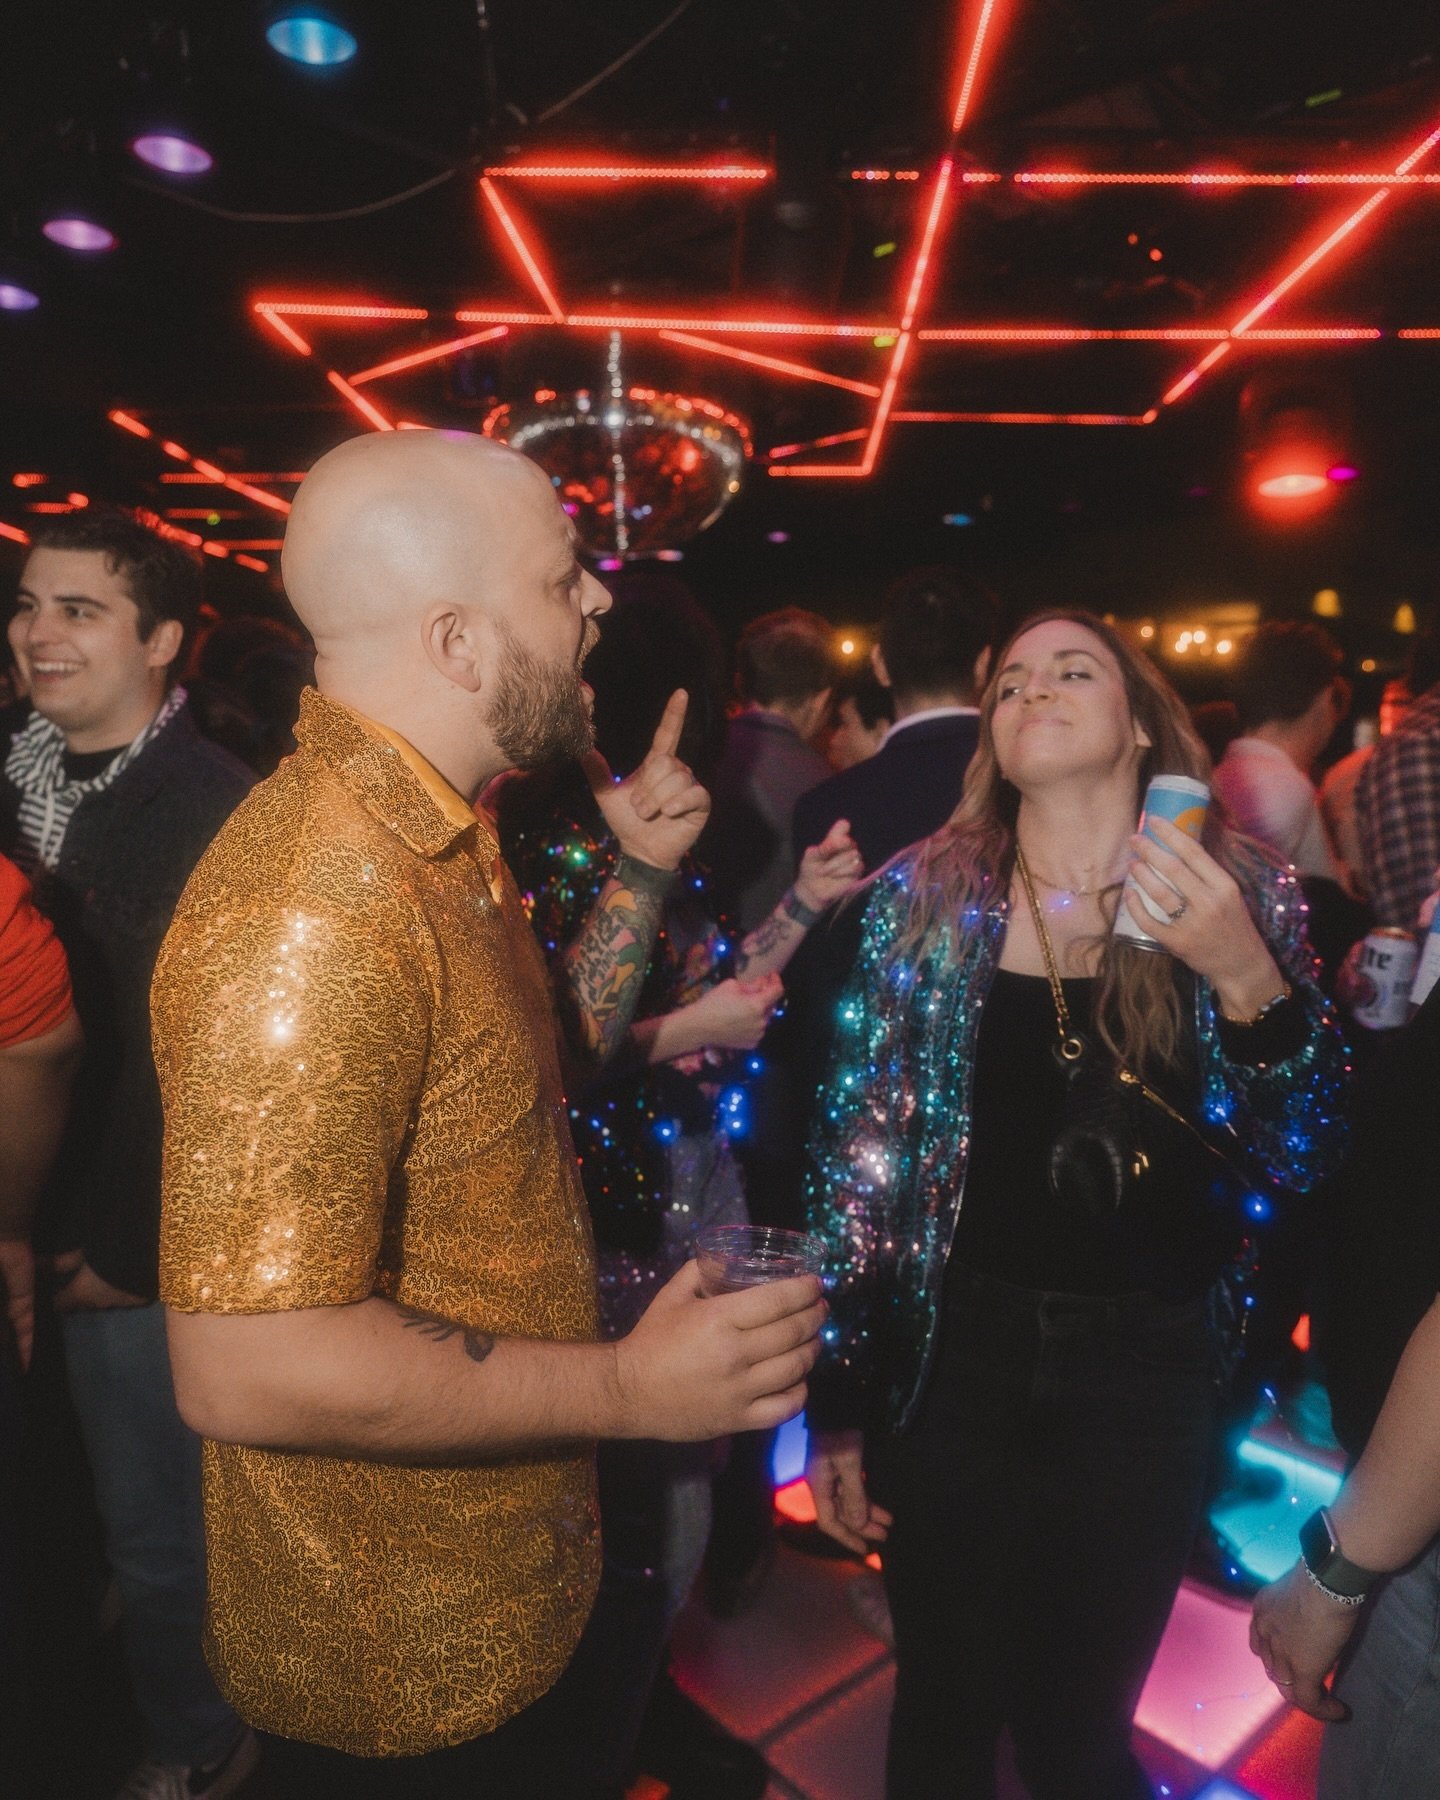 ready to dance the night away? we are!🪩🕺🏽

doors open 2p-late for happy hour (half off cocktails and dollar nostalgic beers) 

music tonight by @djscalf_  and the return of @dominicparisi 🎶 

we have a few tables remaining! text 614.800.5067 for 